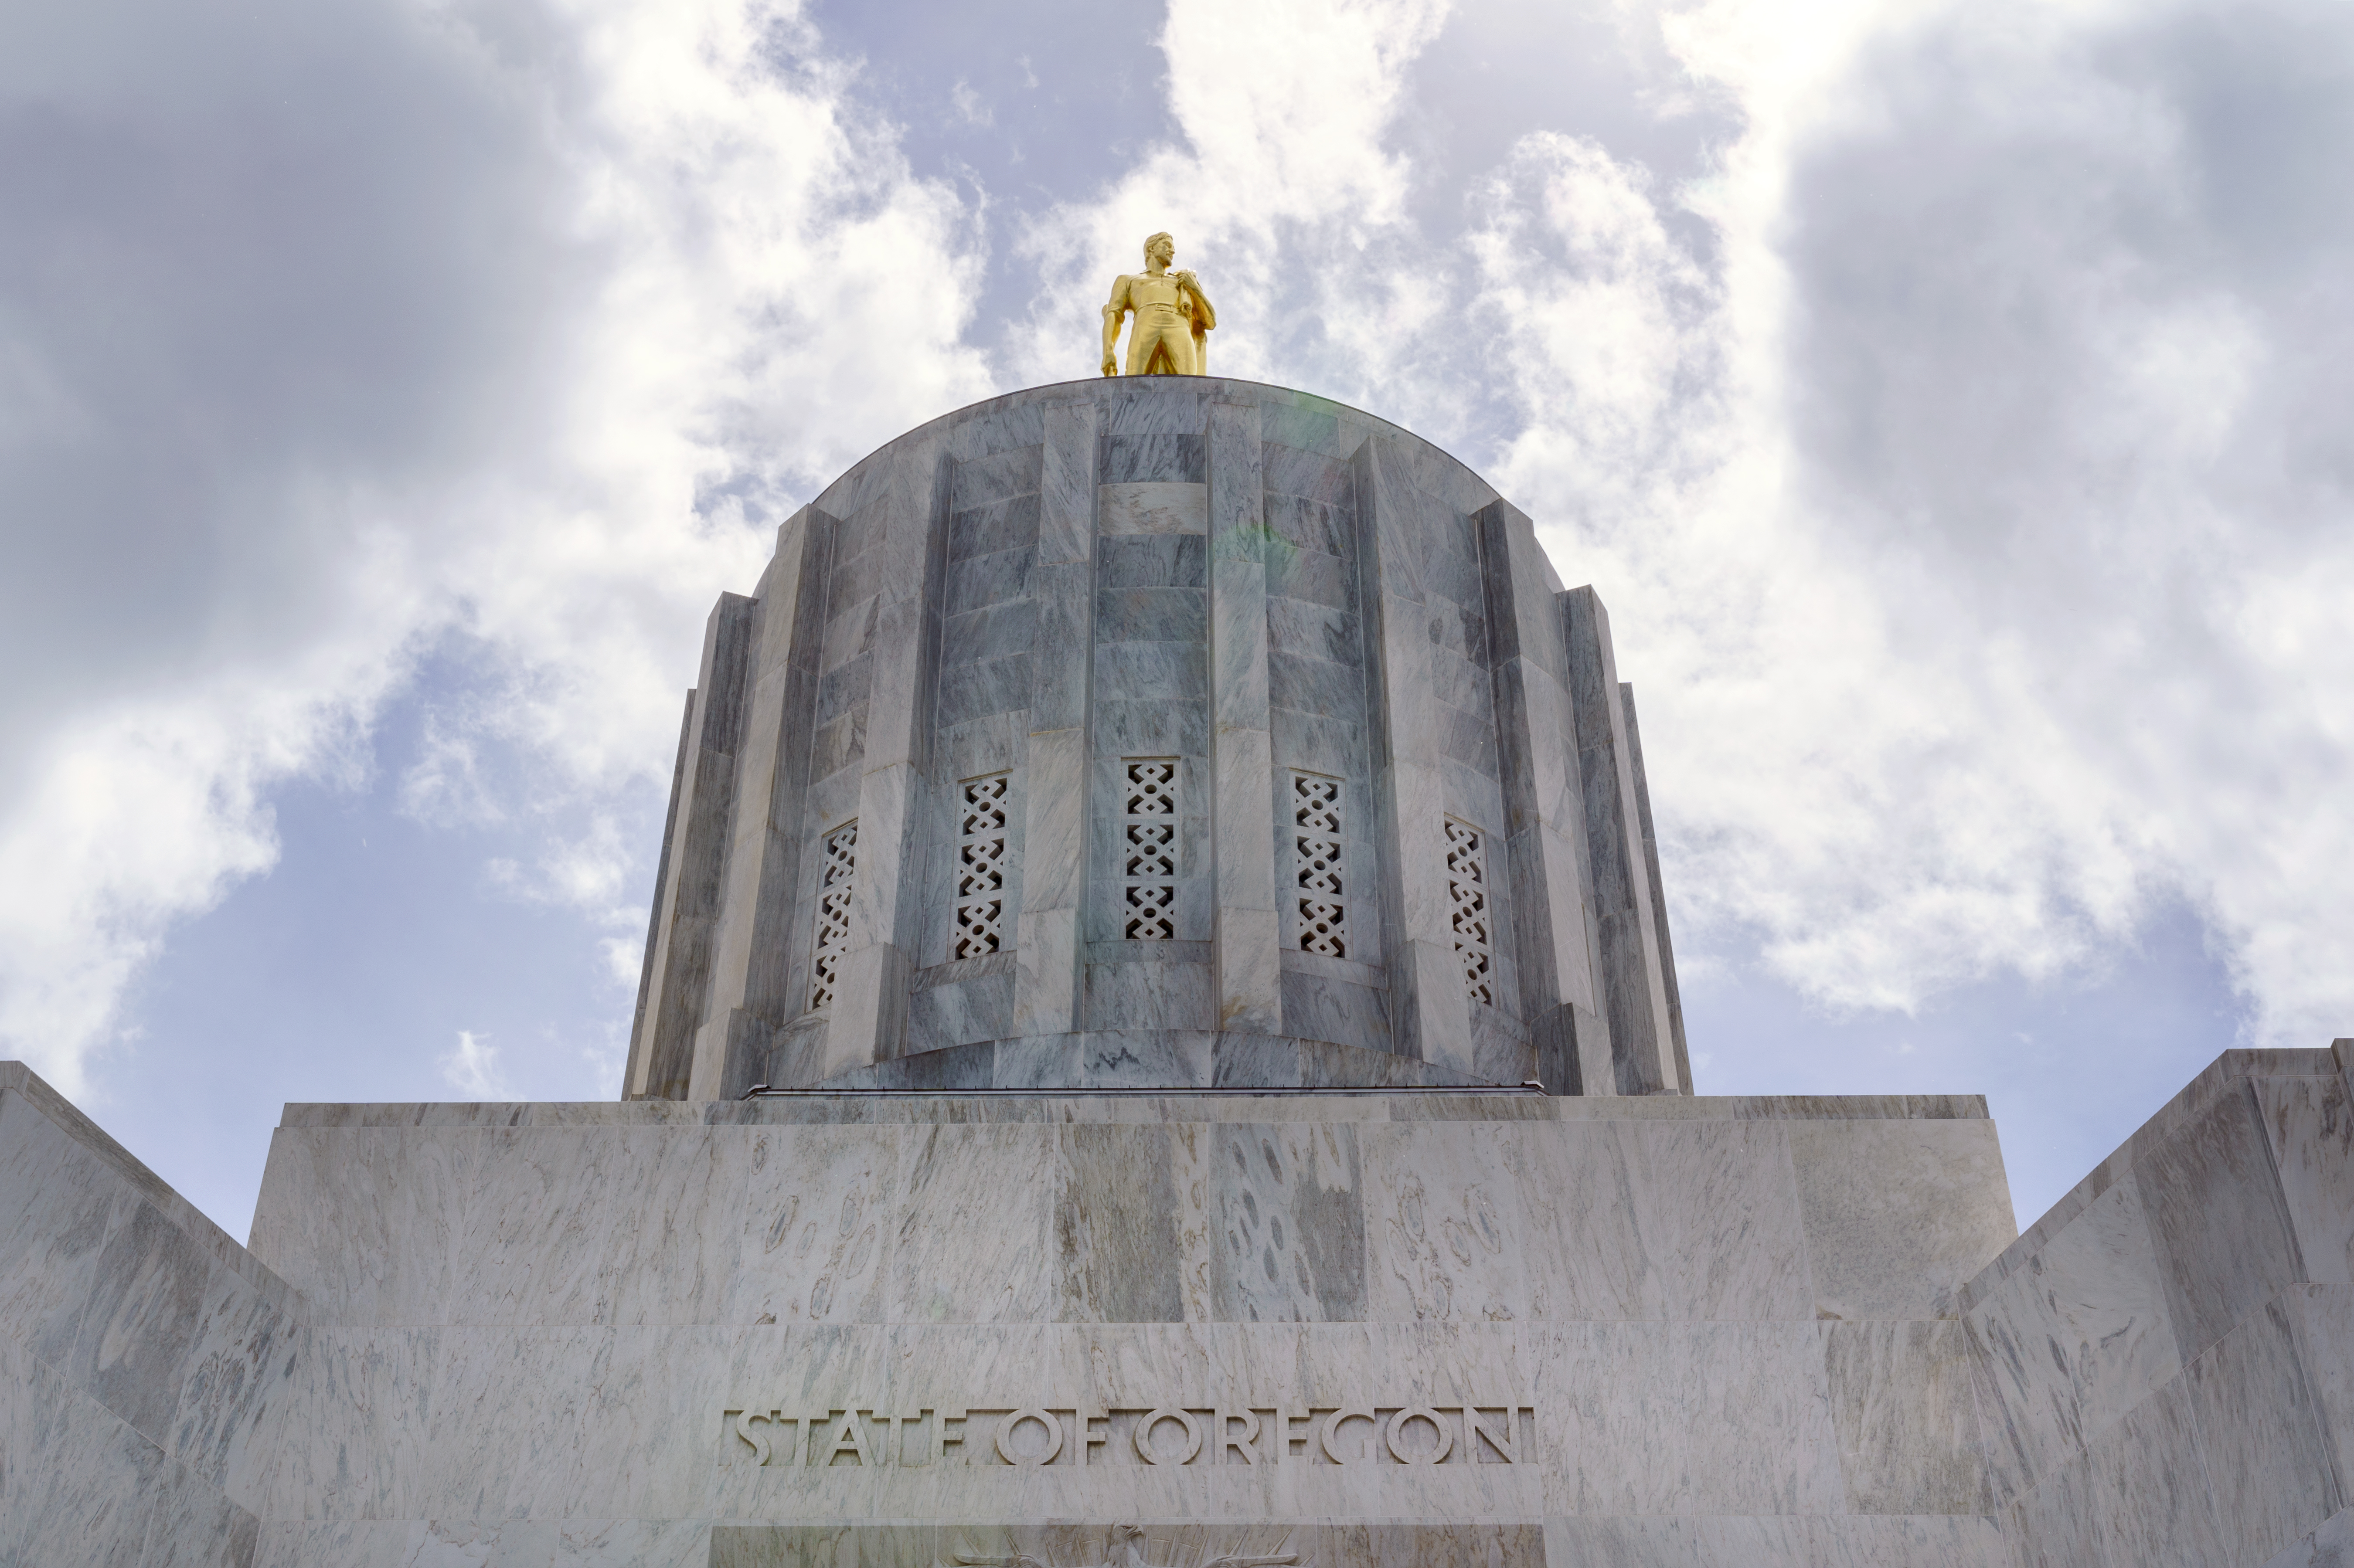 5 things to know as Oregon's legislative session begins - OPB